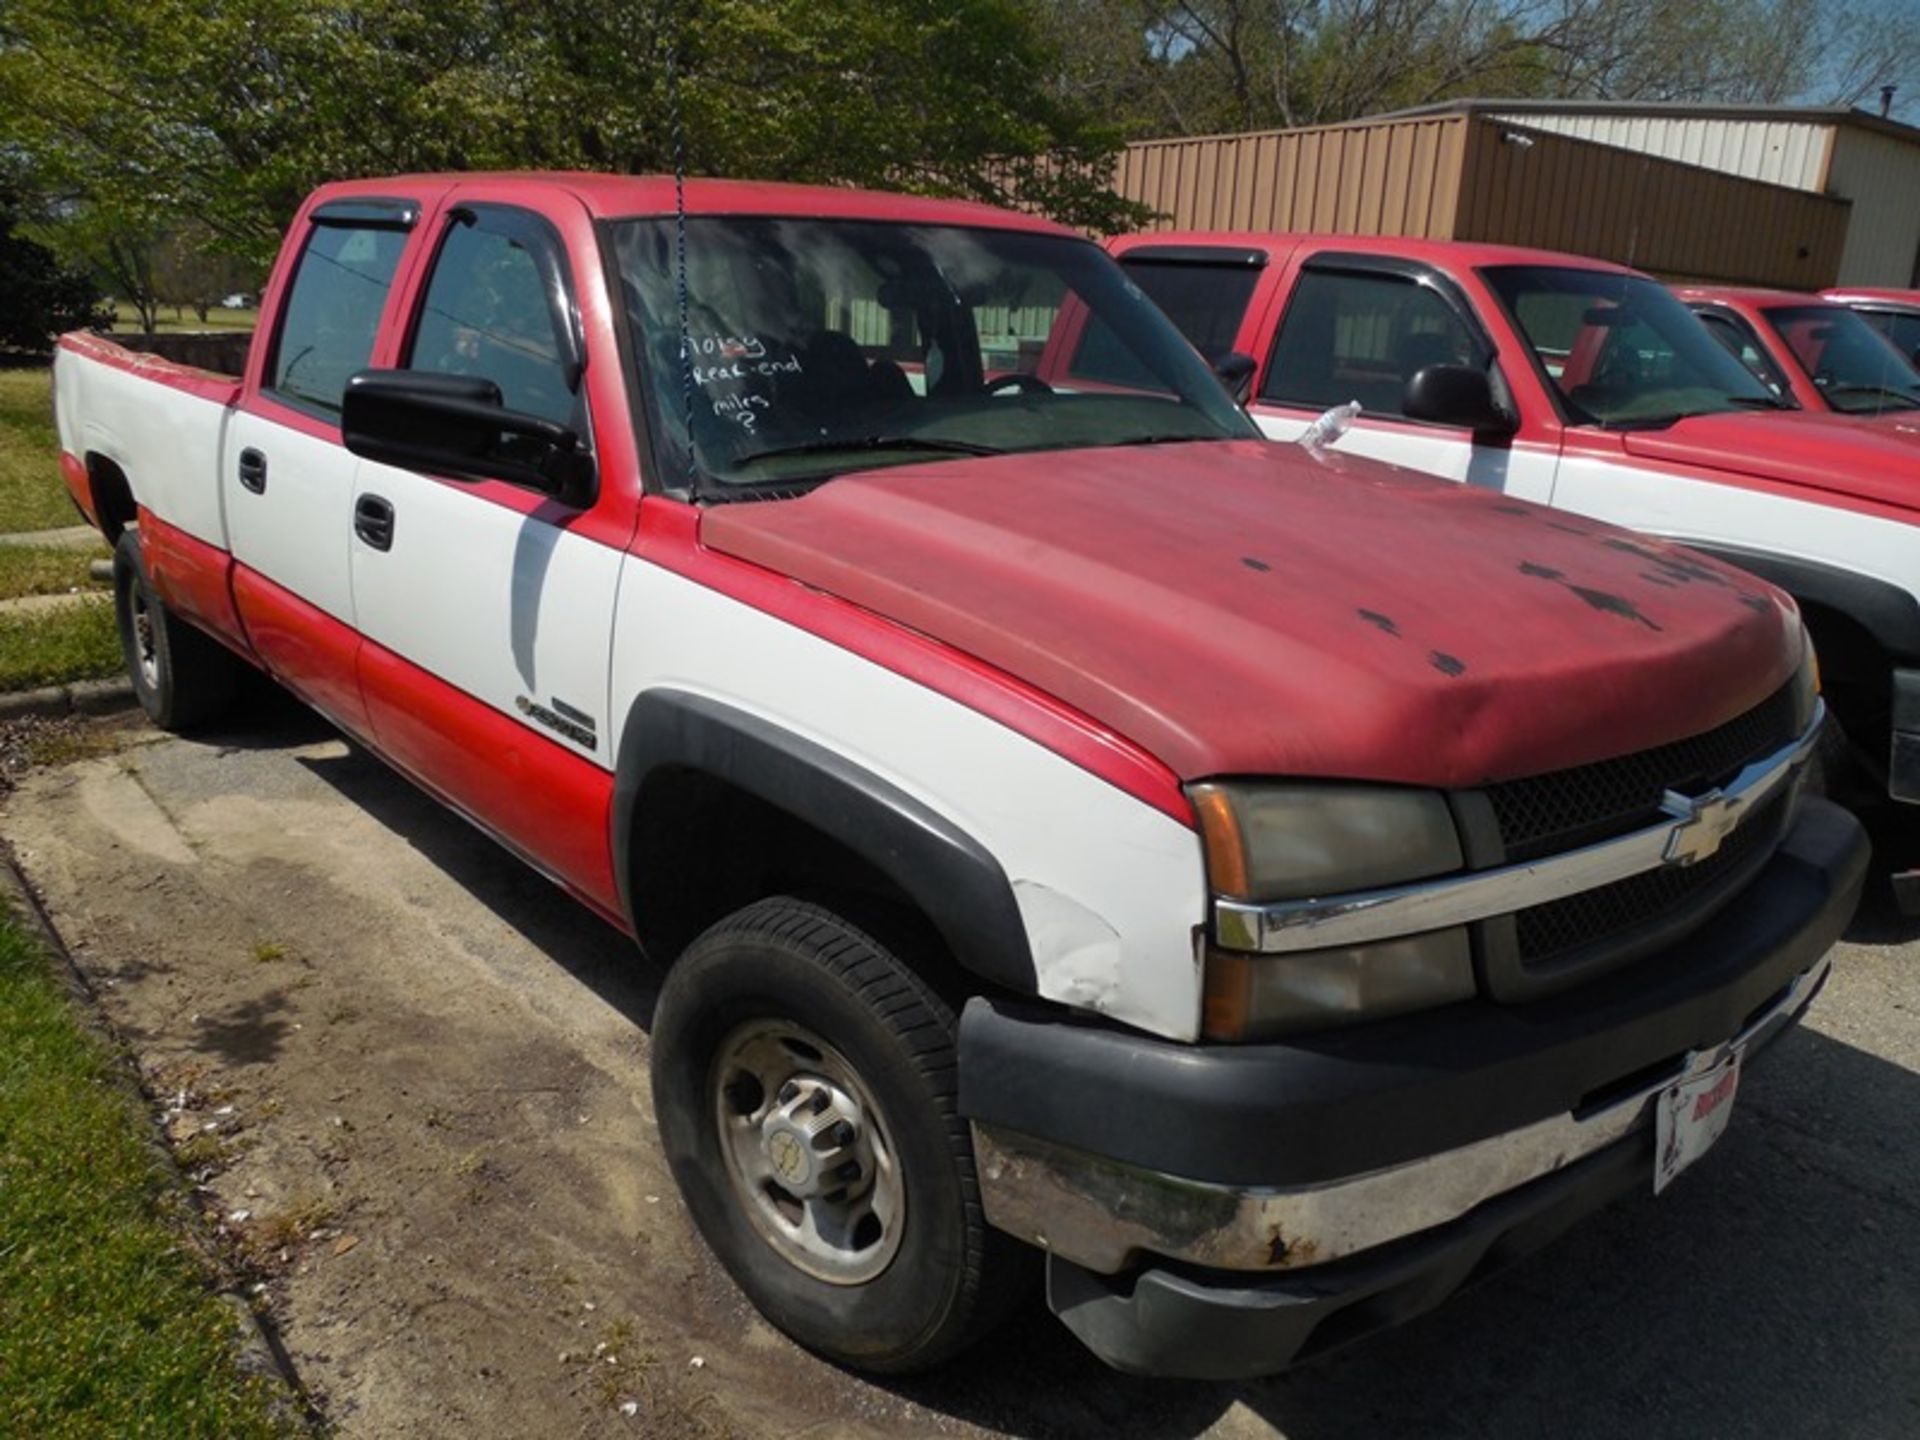 2006 CHEV 2500 mileage unknown dsl, crew cab, vin# 1GCHC23DX6F265048 noisy rearend overall condition - Image 4 of 4